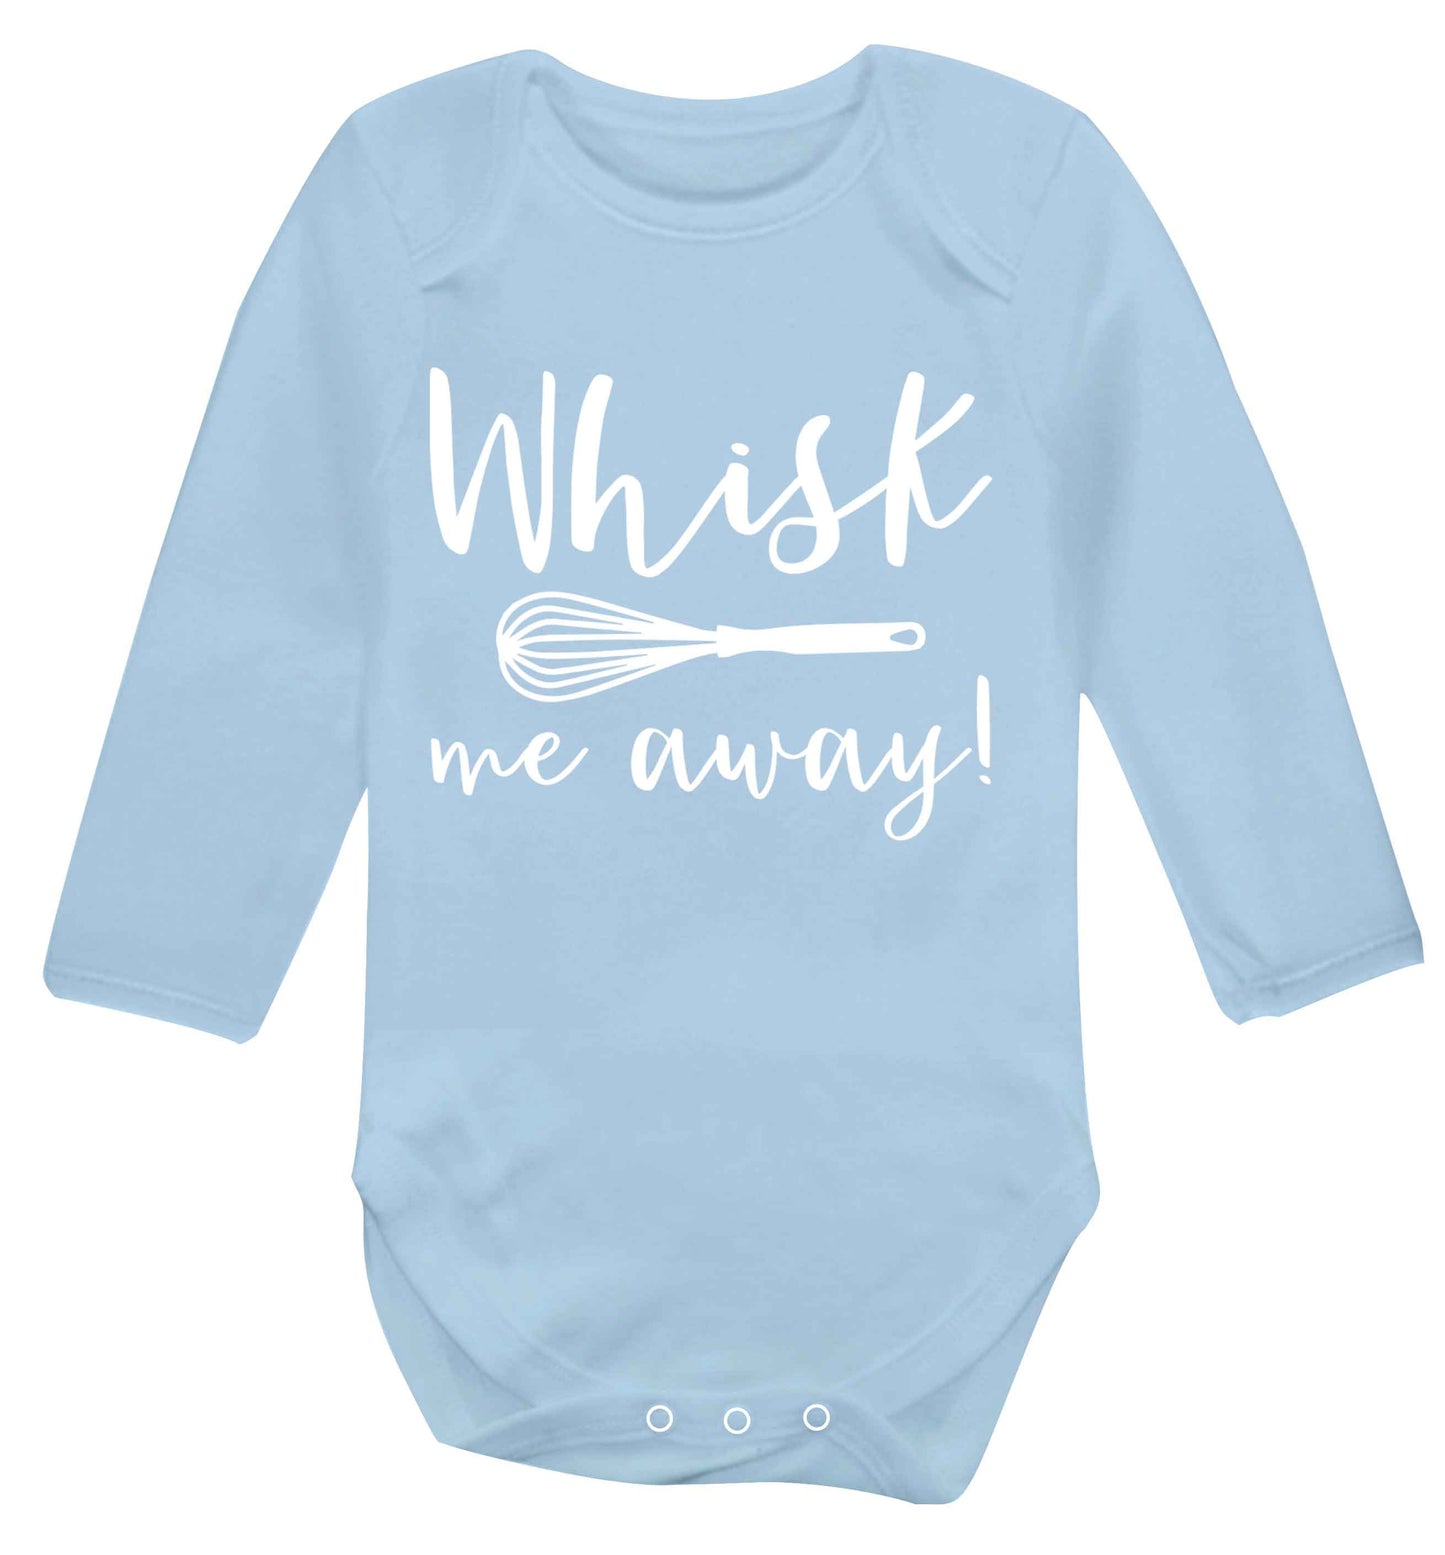 Whisk me away Baby Vest long sleeved pale blue 6-12 months